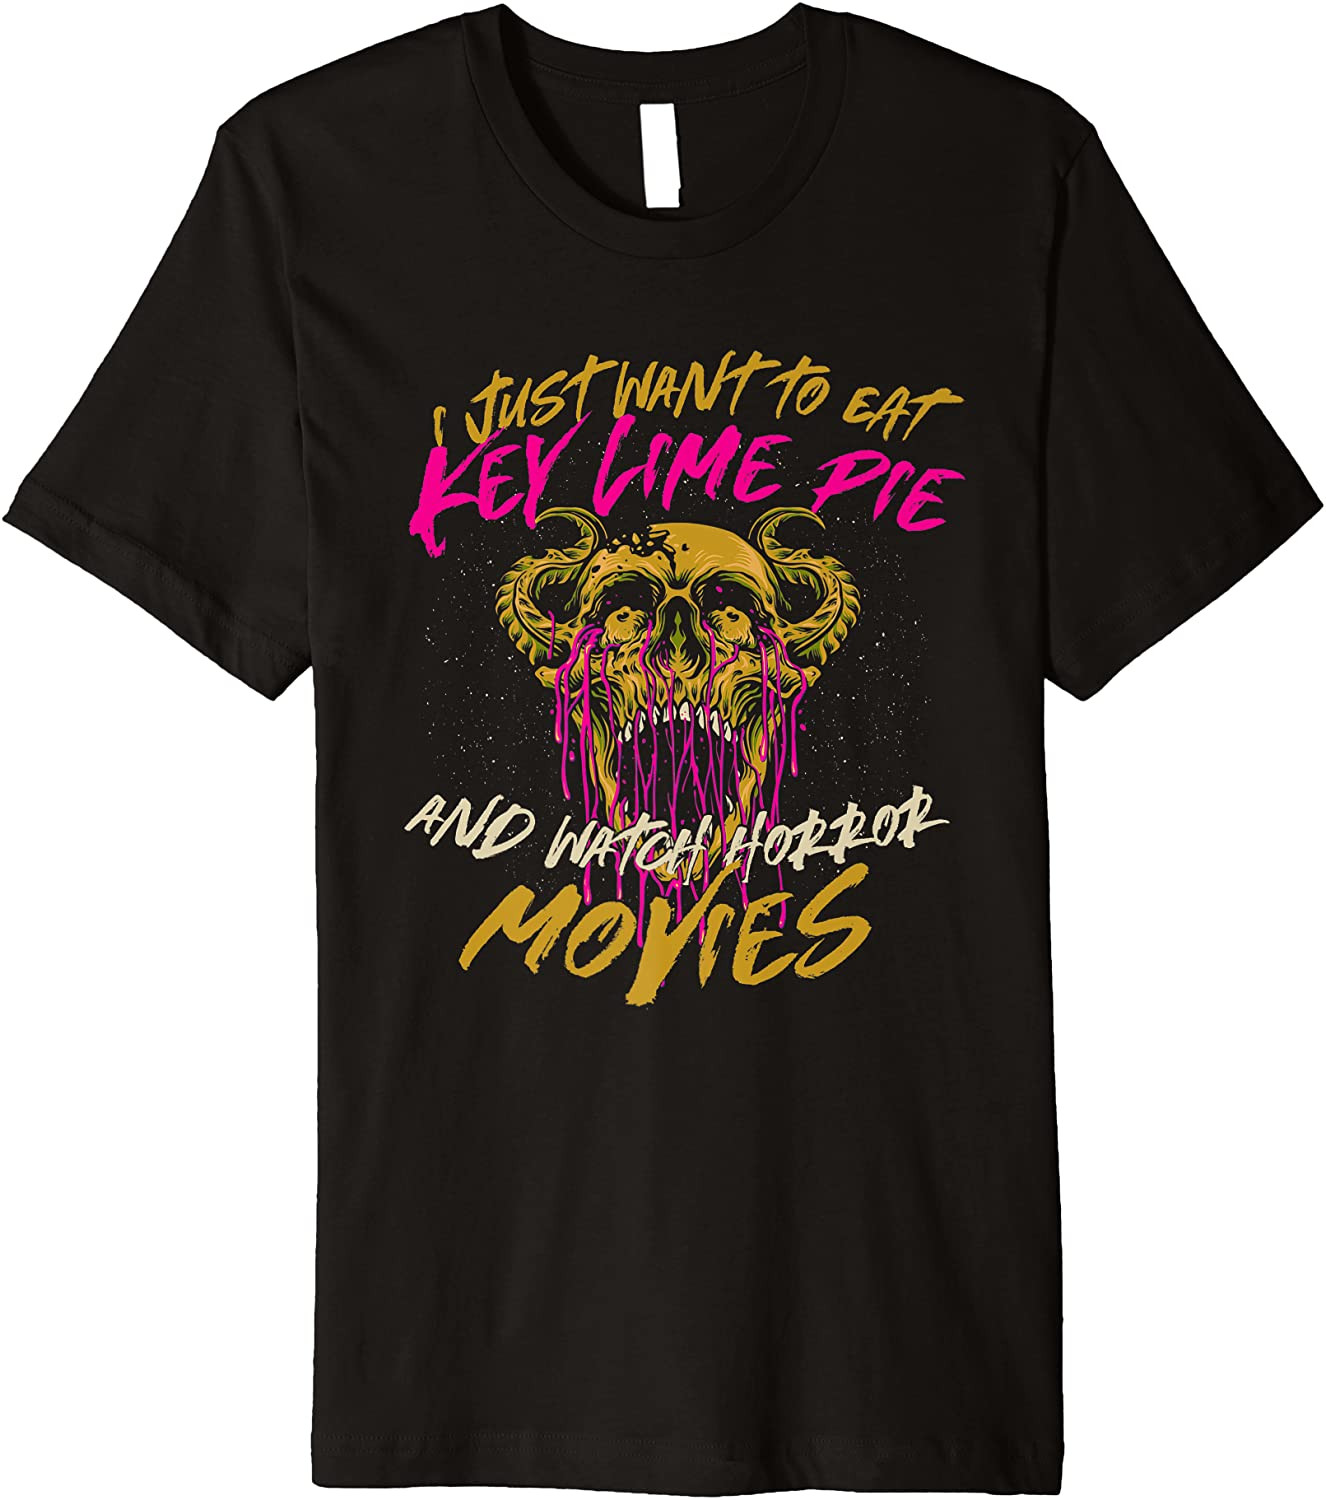 Eat Key Lime Pie And Watch Horror Movies Comfort Food T-Shirt